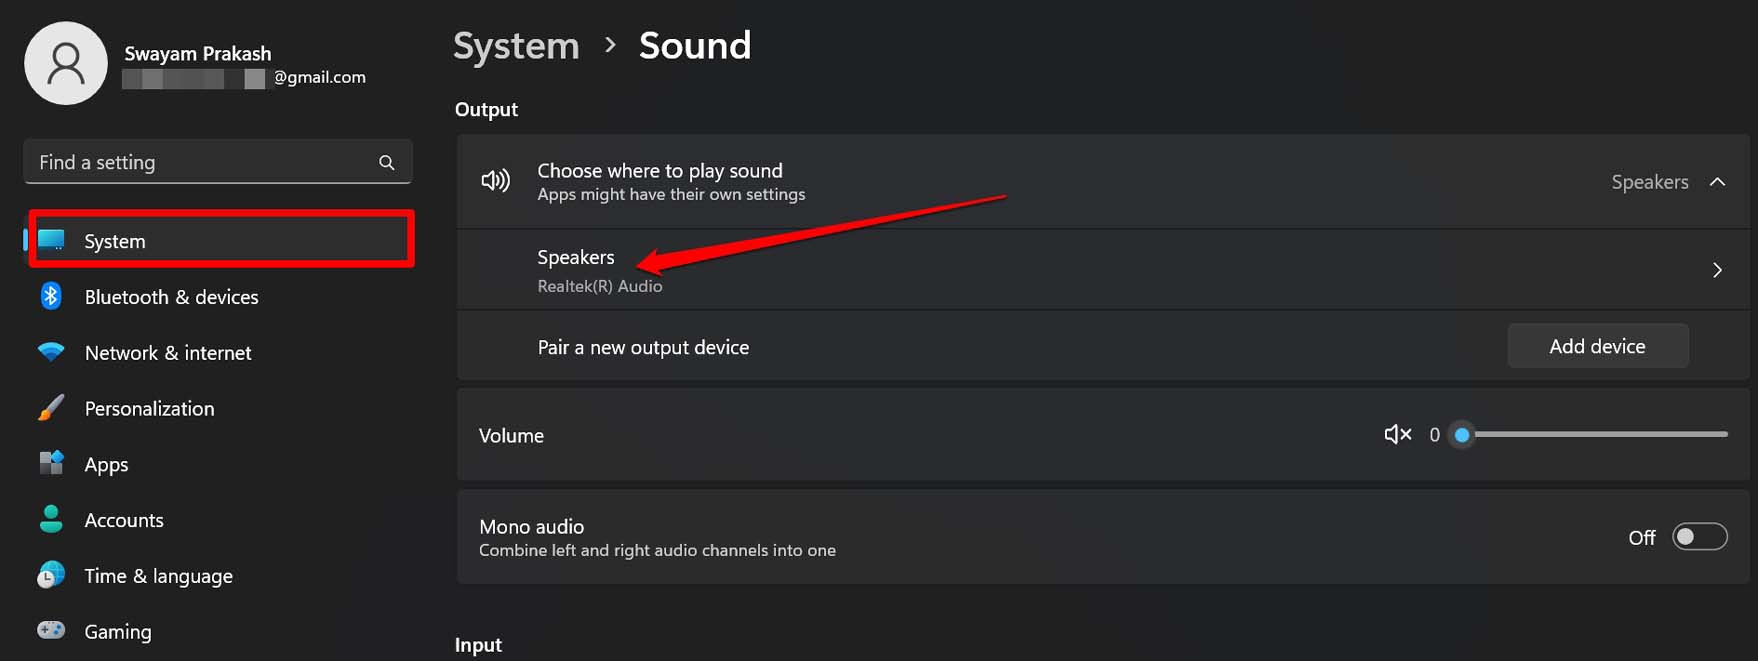 select the audio output device